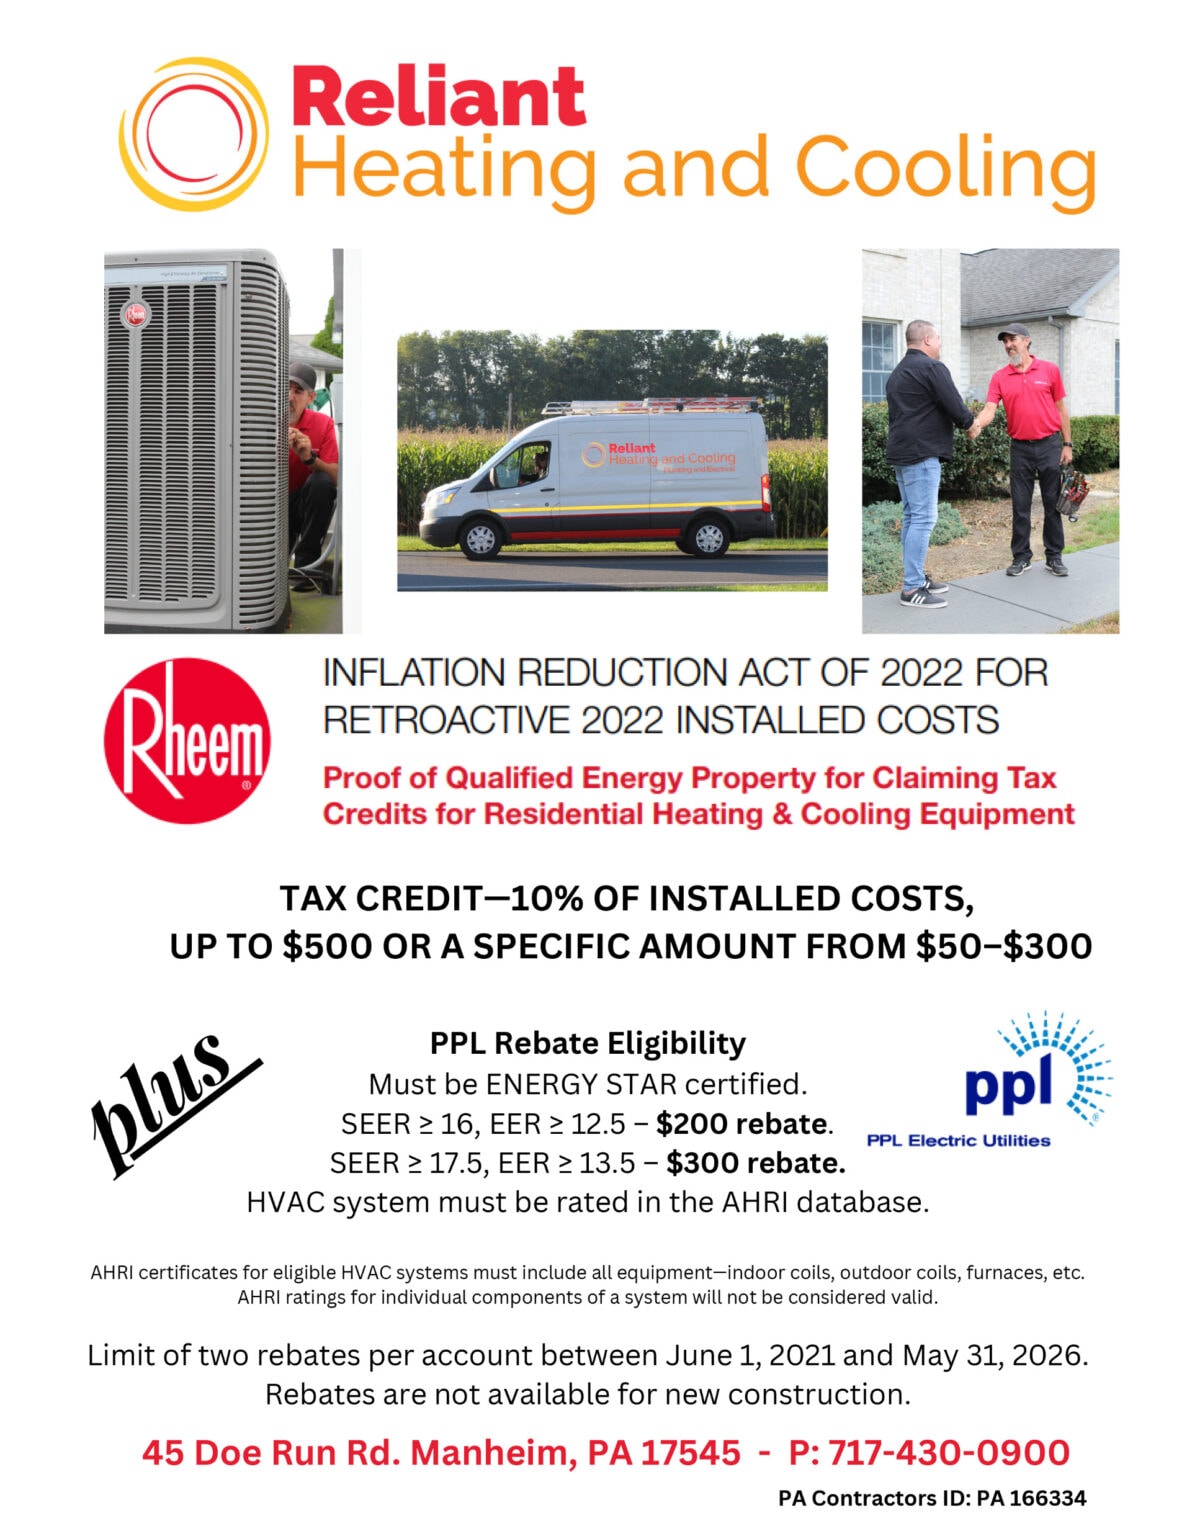 specials-reliant-heating-cooling-discounts-manheim-pa